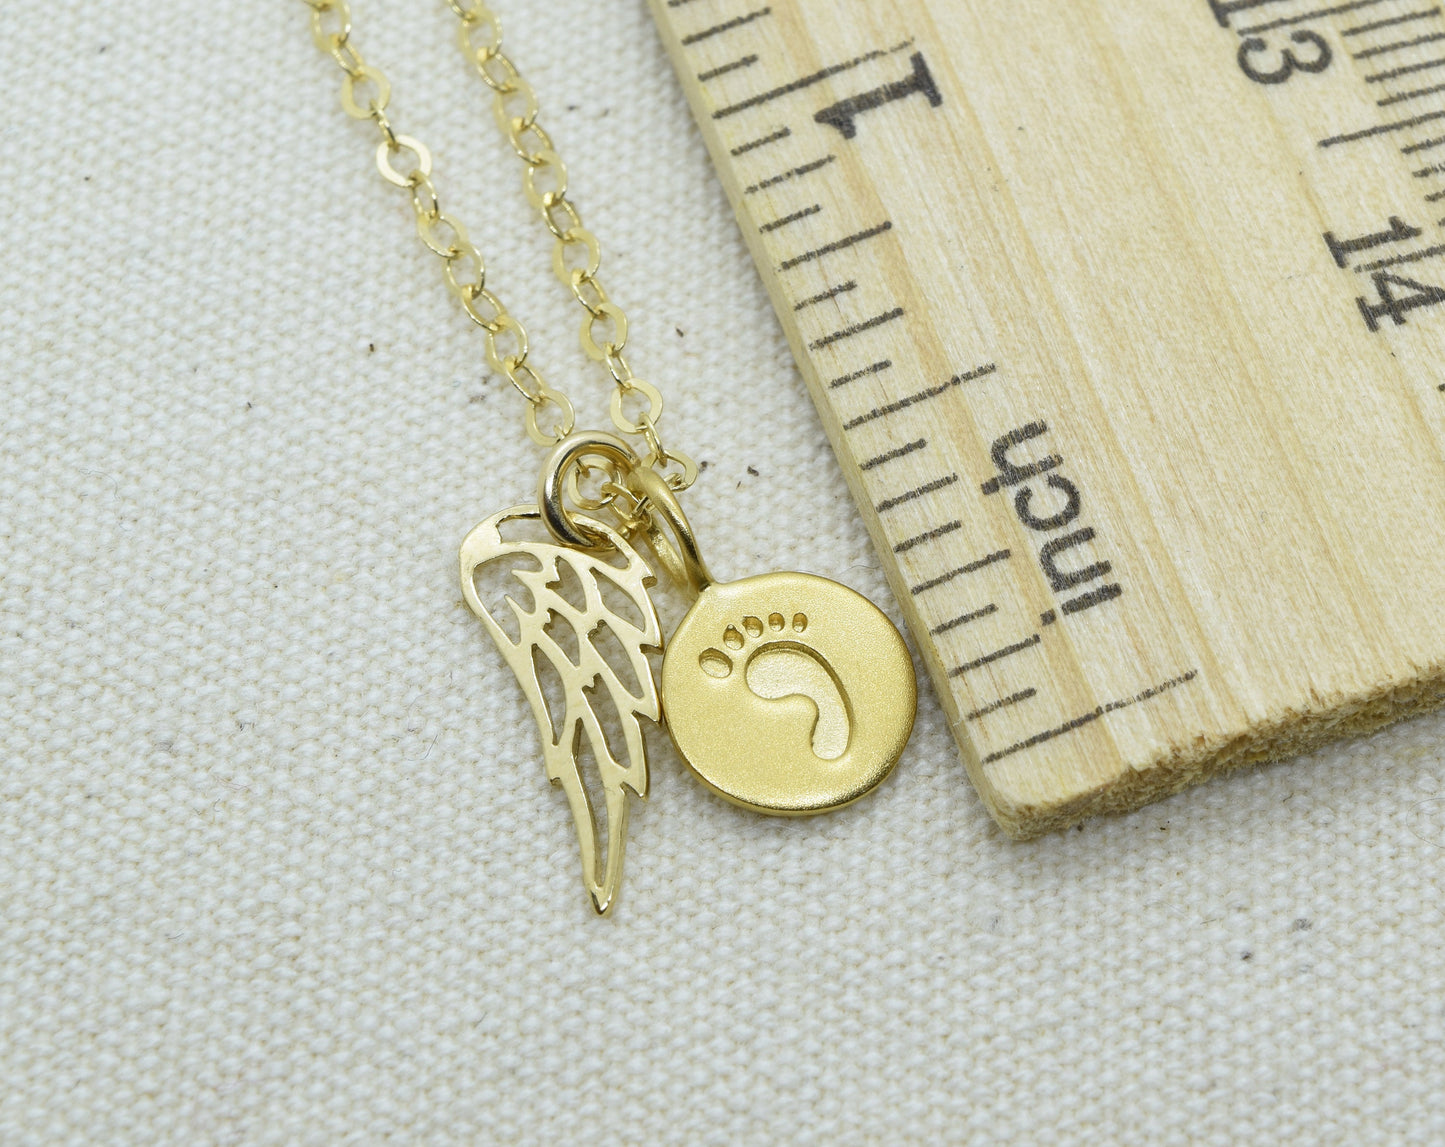 Gold Baby Foot Charm Necklace with Angel Wing Pendant and Pearl